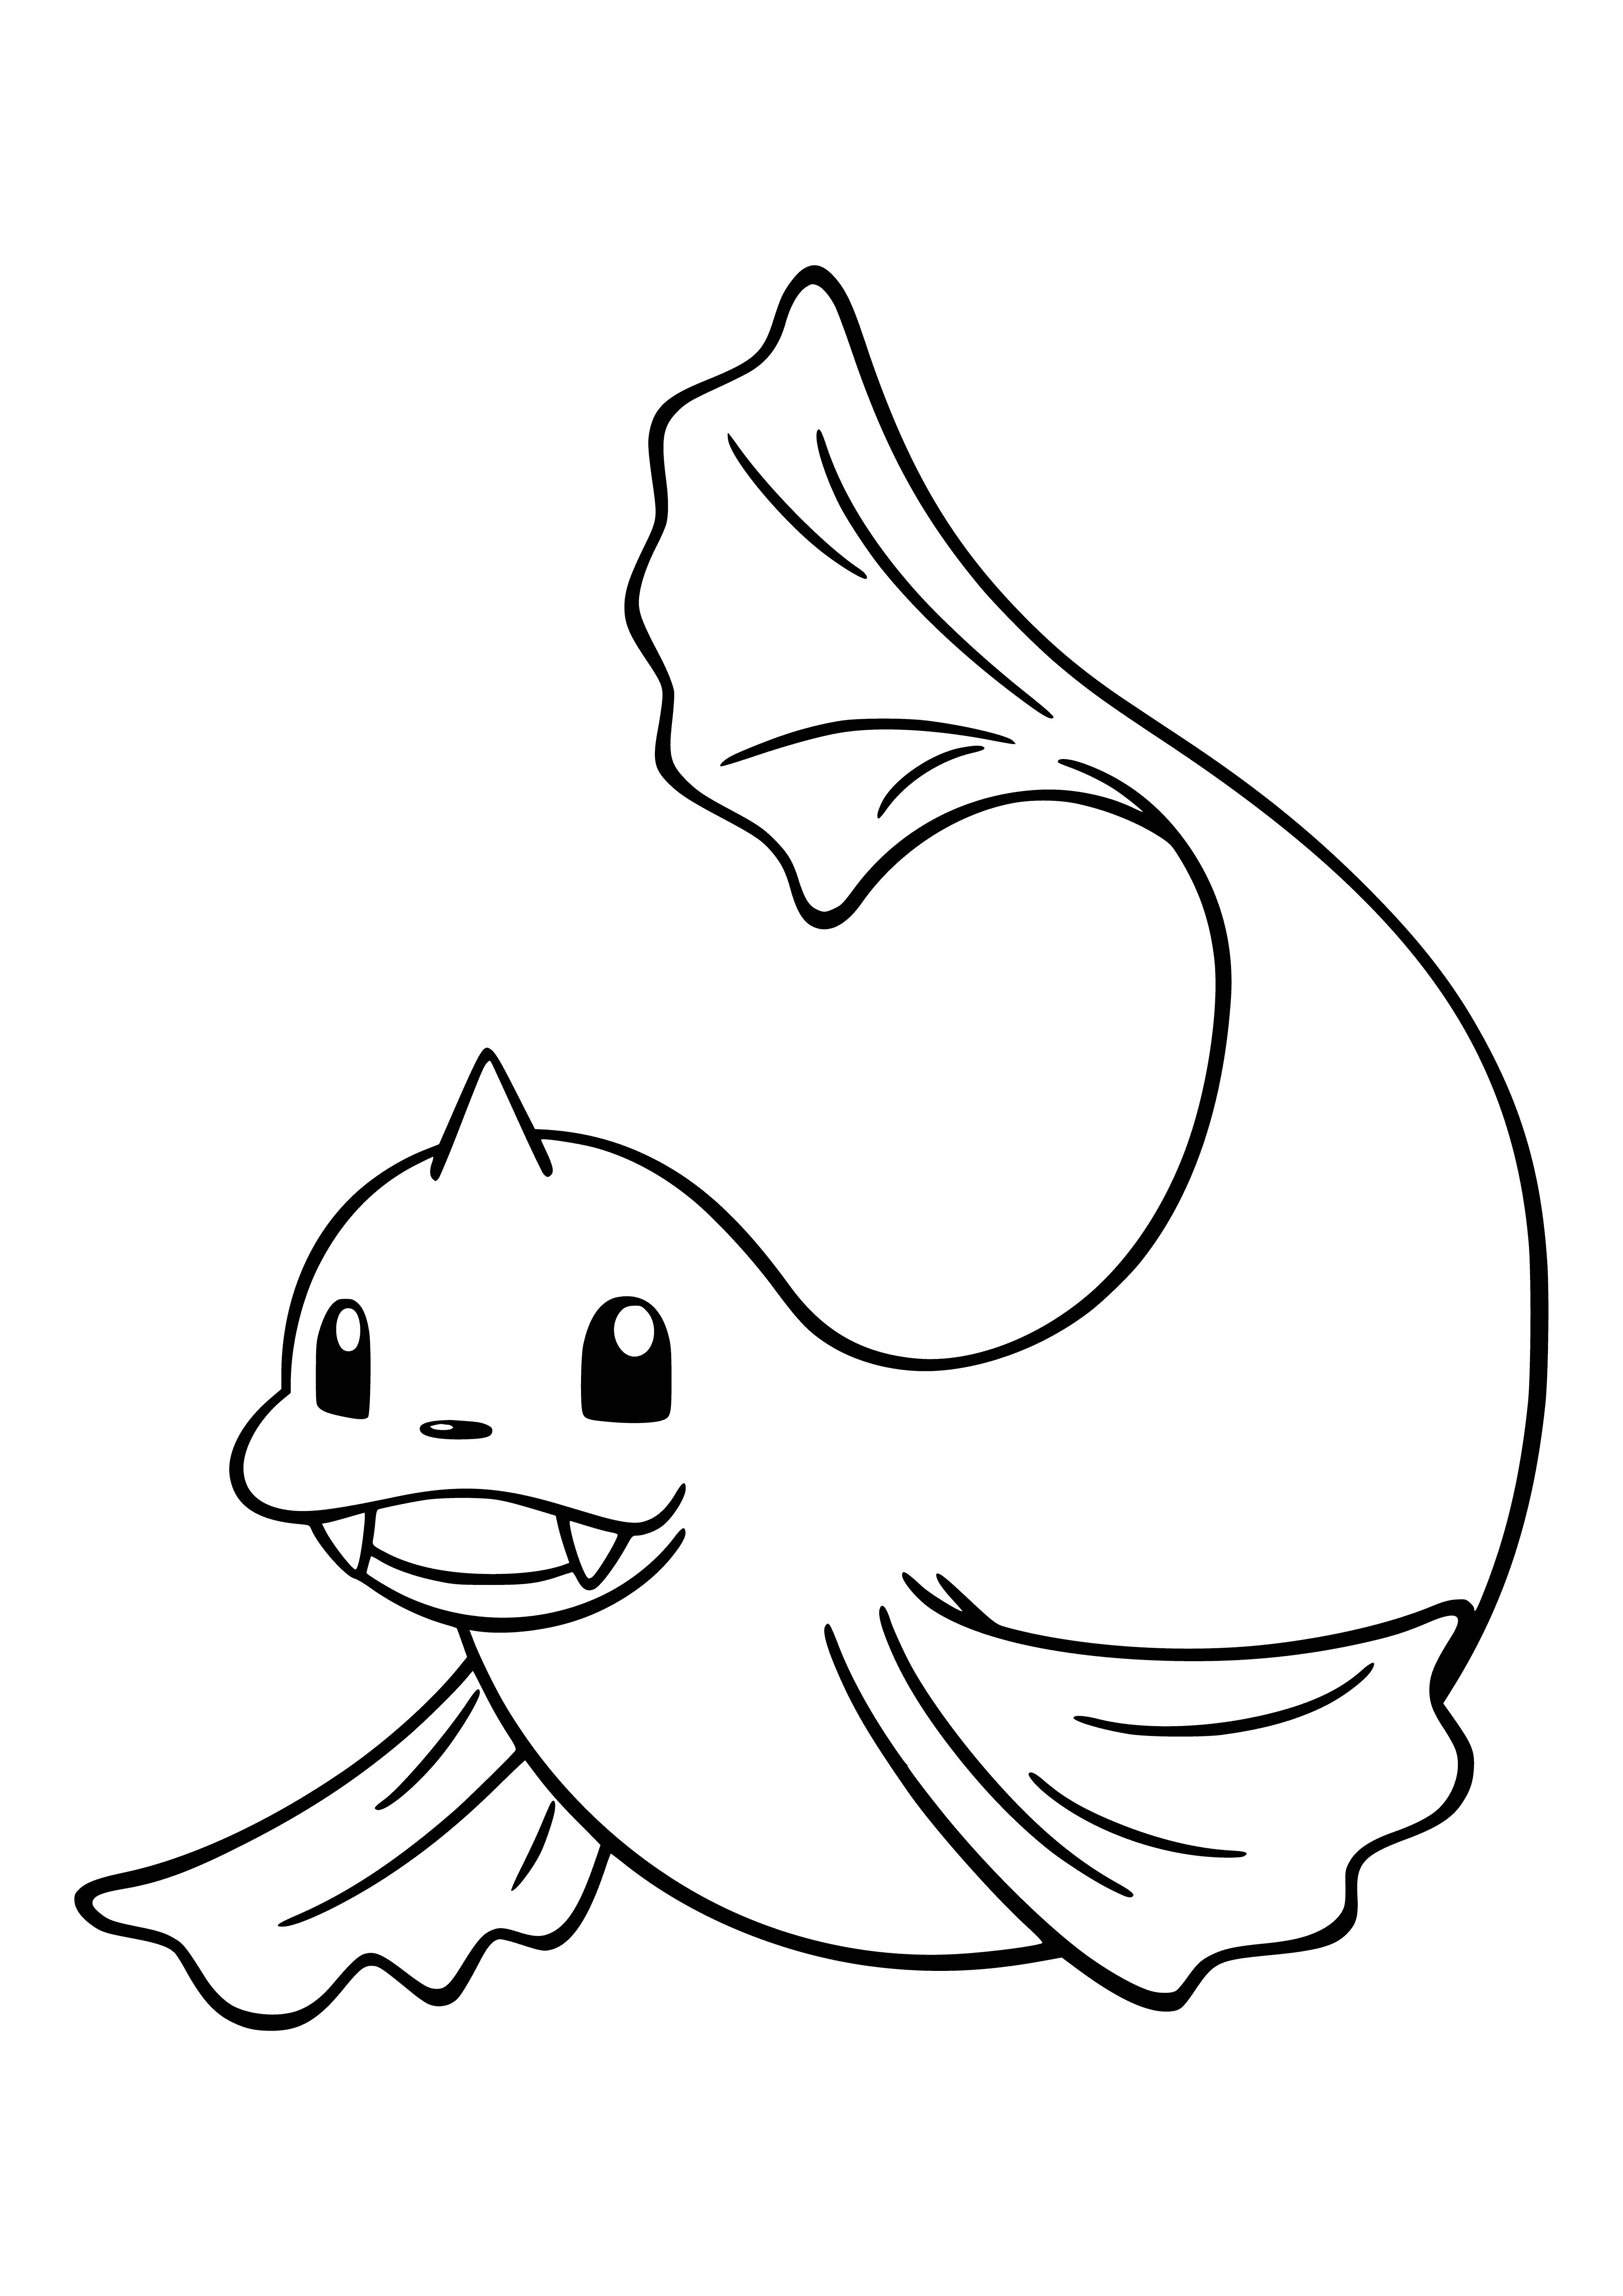 coloring page: Large orange & white Pokémon with curved body, black eyes & small fins. Open mouth shows small teeth.